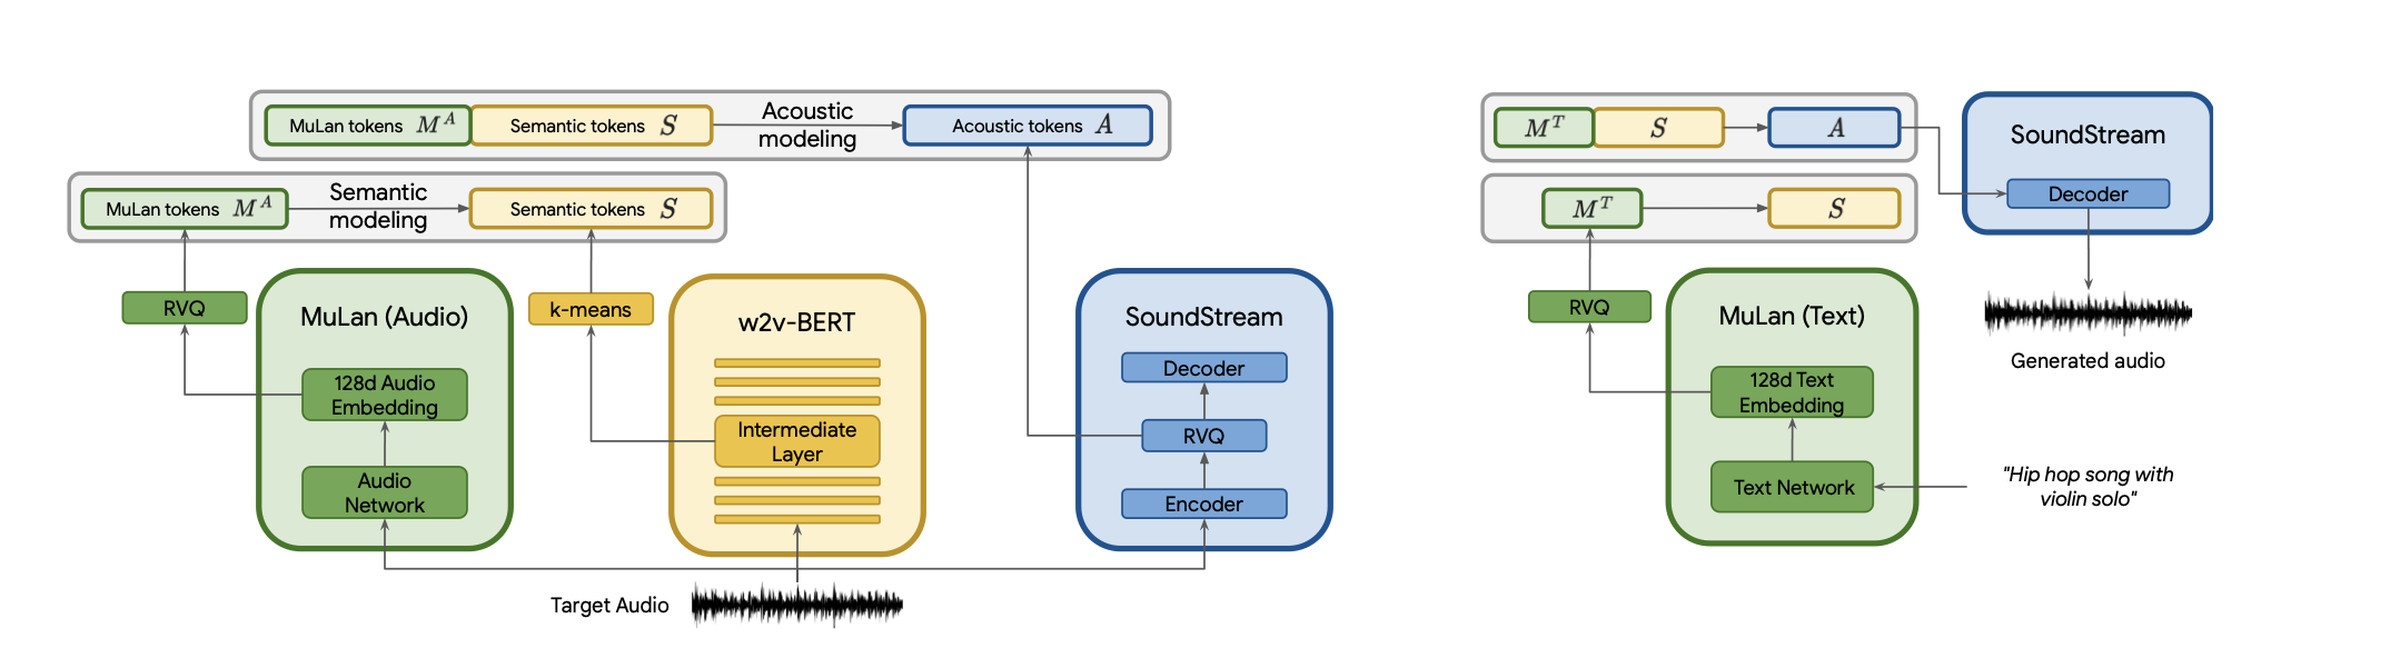 Figure showing part of the MusicLM process, involving SoundStream, w2v-BERT and MuLan.